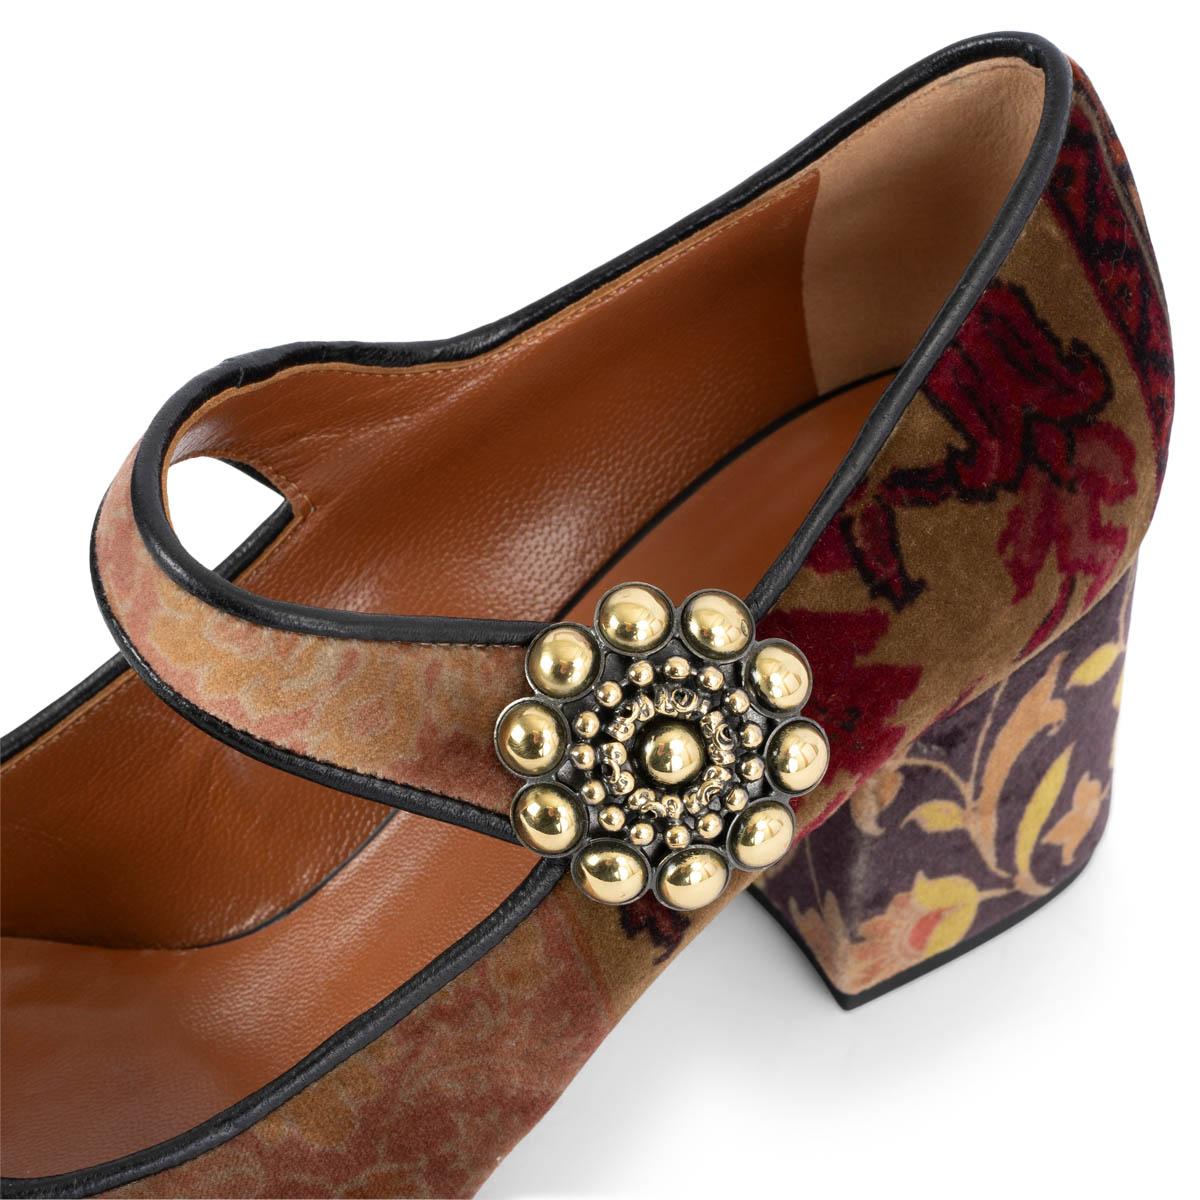 ETRO earthy FLORAL VELVET MARY JANE Pumps Shoes 38 3